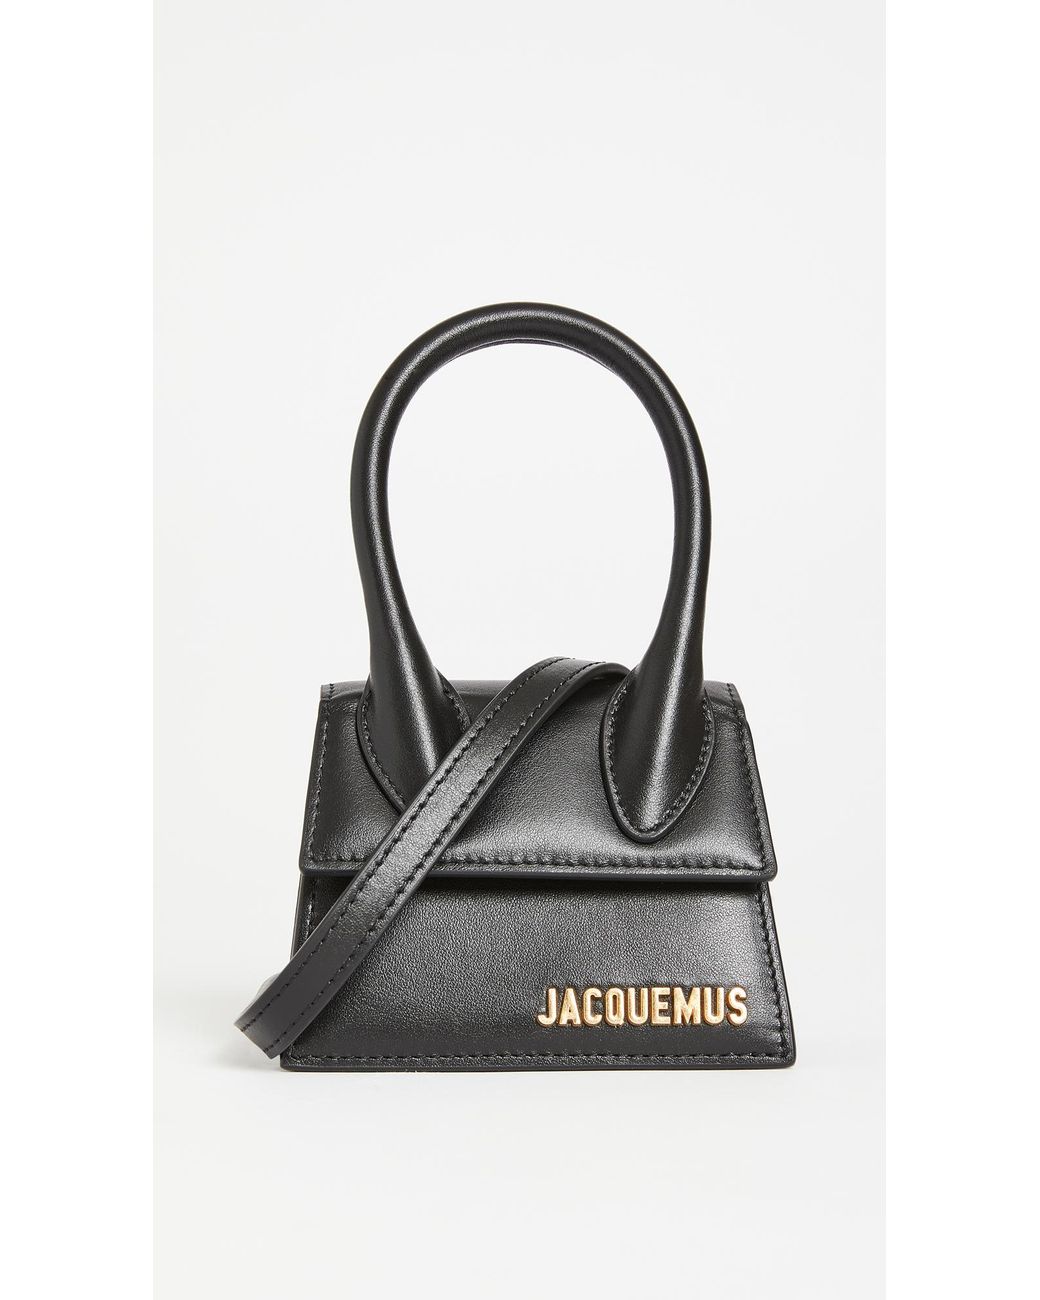 Jacquemus Leather Le Chiquito Bag in Black - Lyst